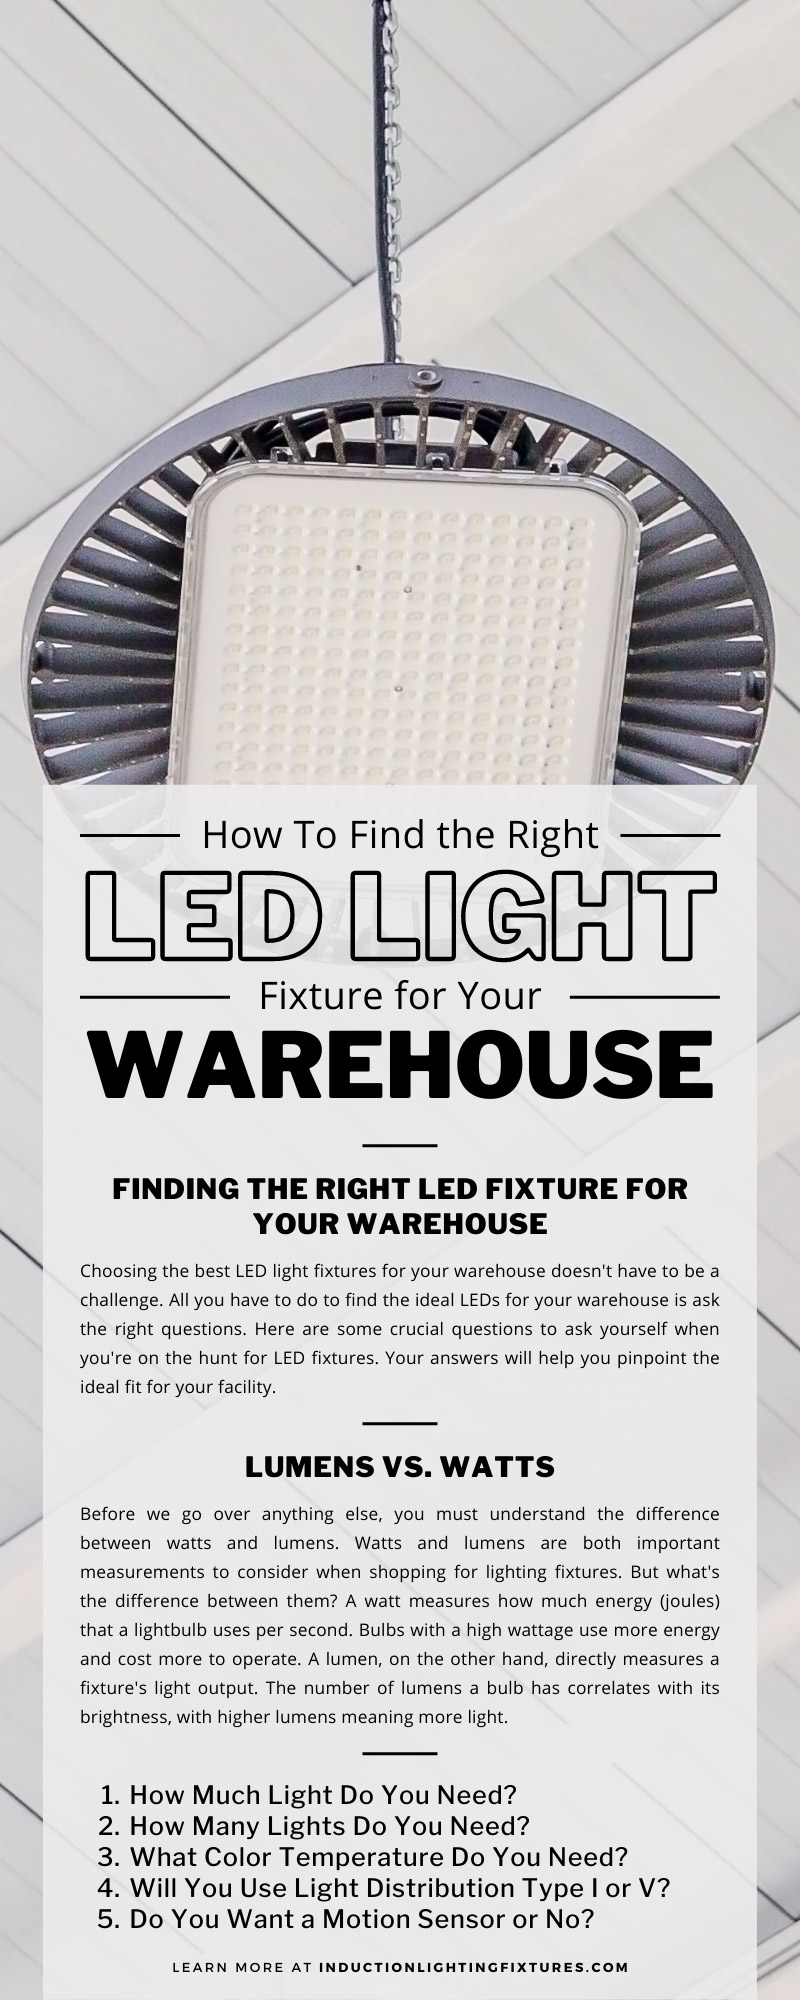 How To Find the Right LED Light Fixture for Your Warehouse